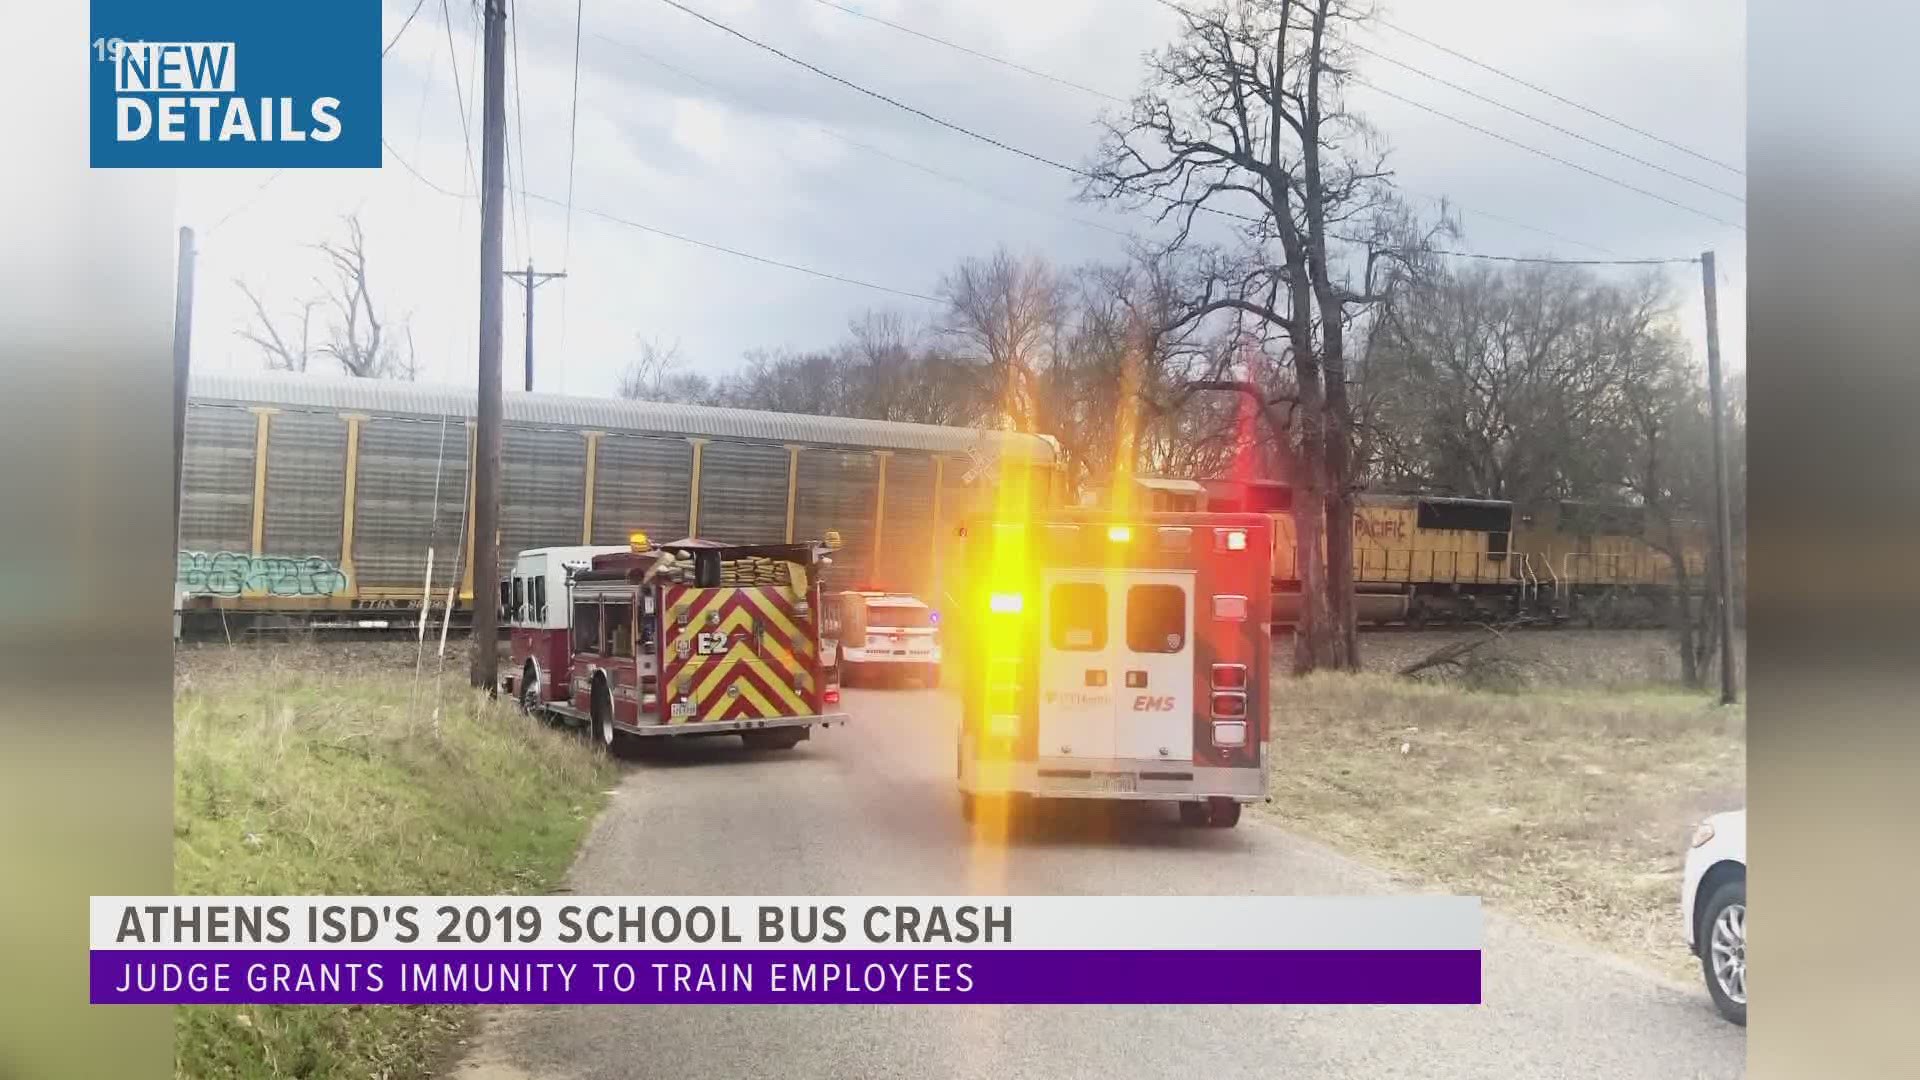 The crash killed 13-year-old Athens middle school student Christopher Bonilla.